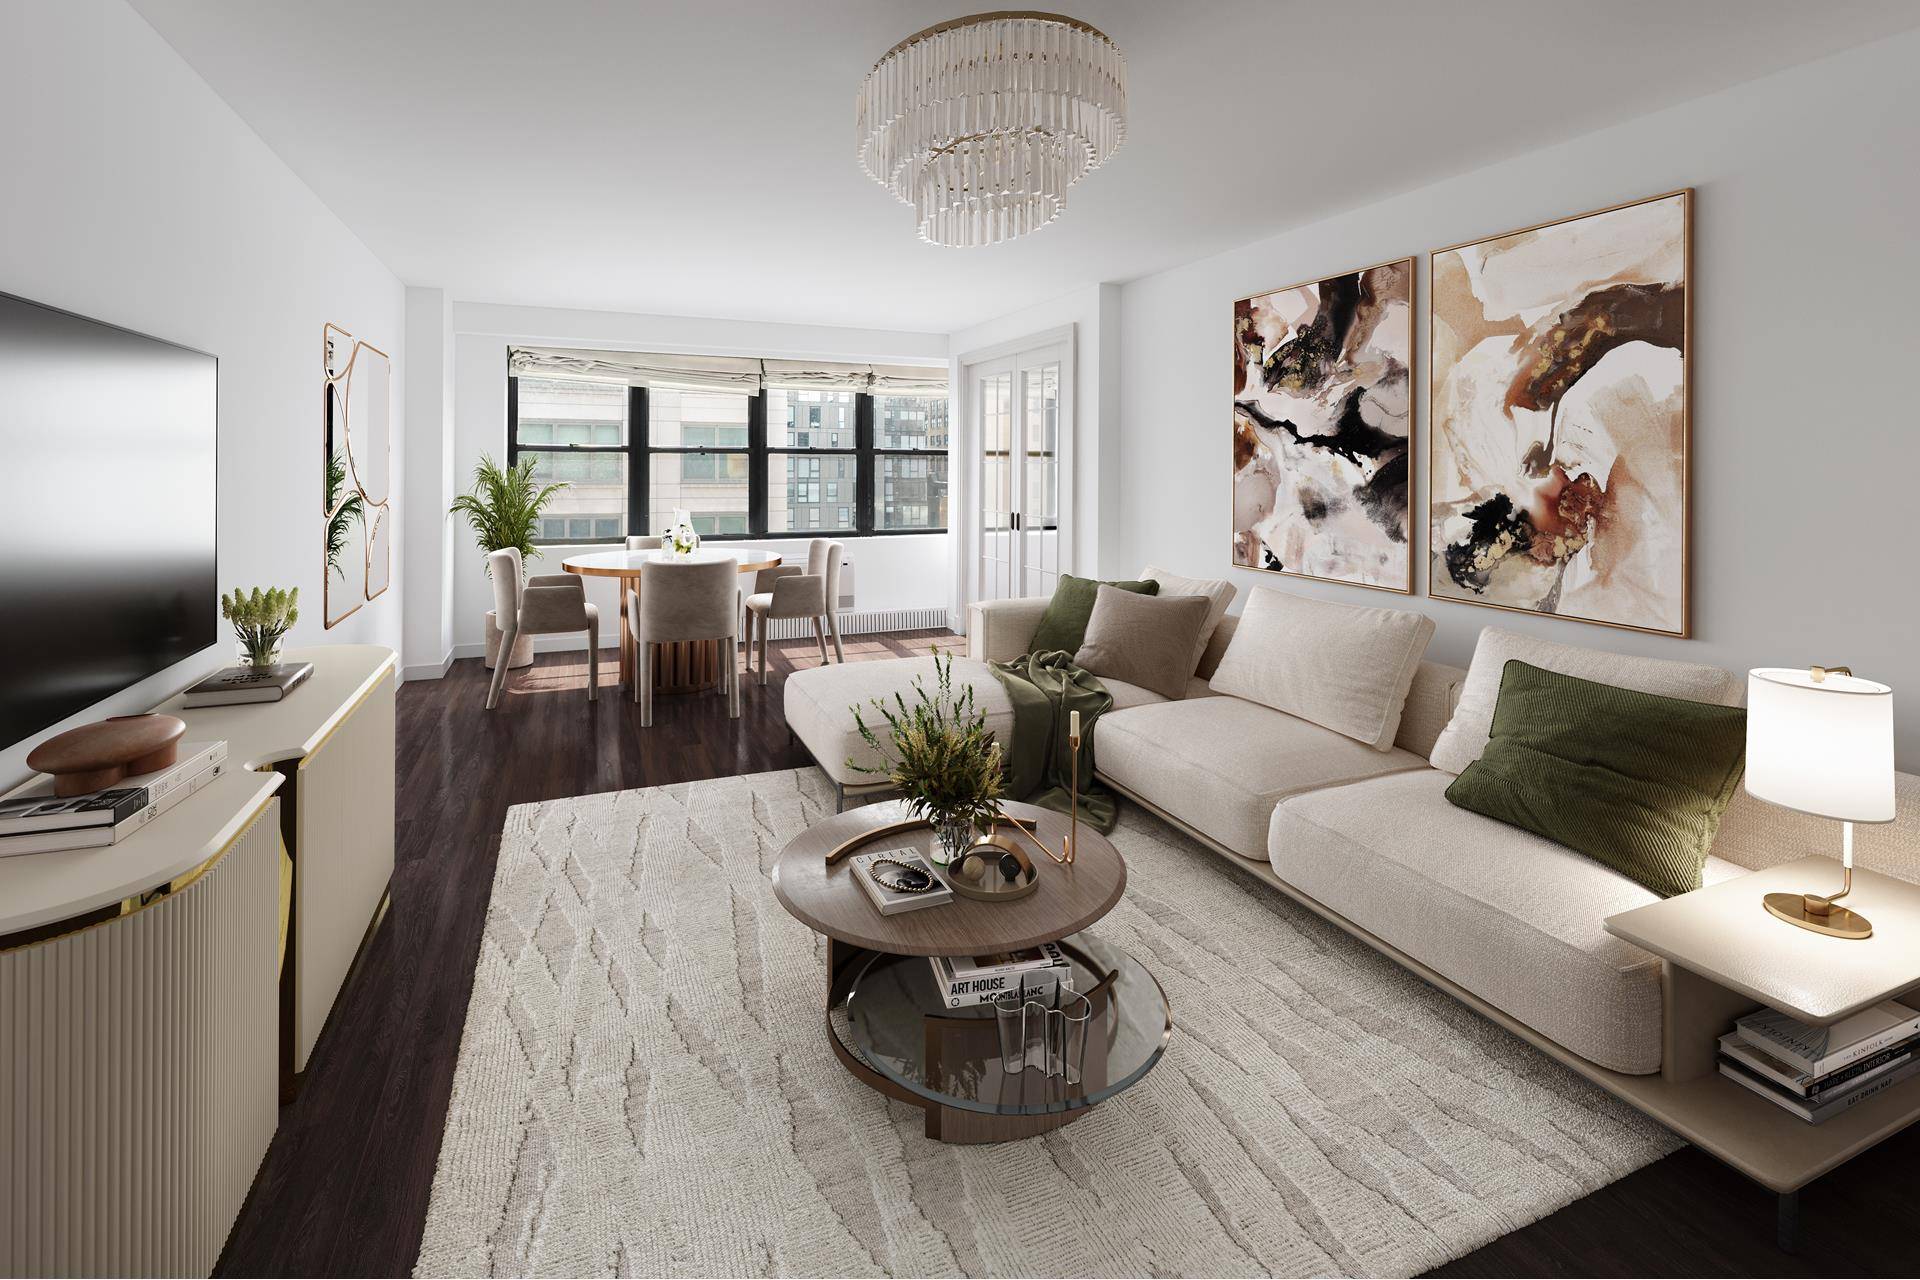 Welcome to apartment 14J at 330 Third Avenue, a stunning high floor junior one bedroom oasis that has been tastefully renovated to perfection.